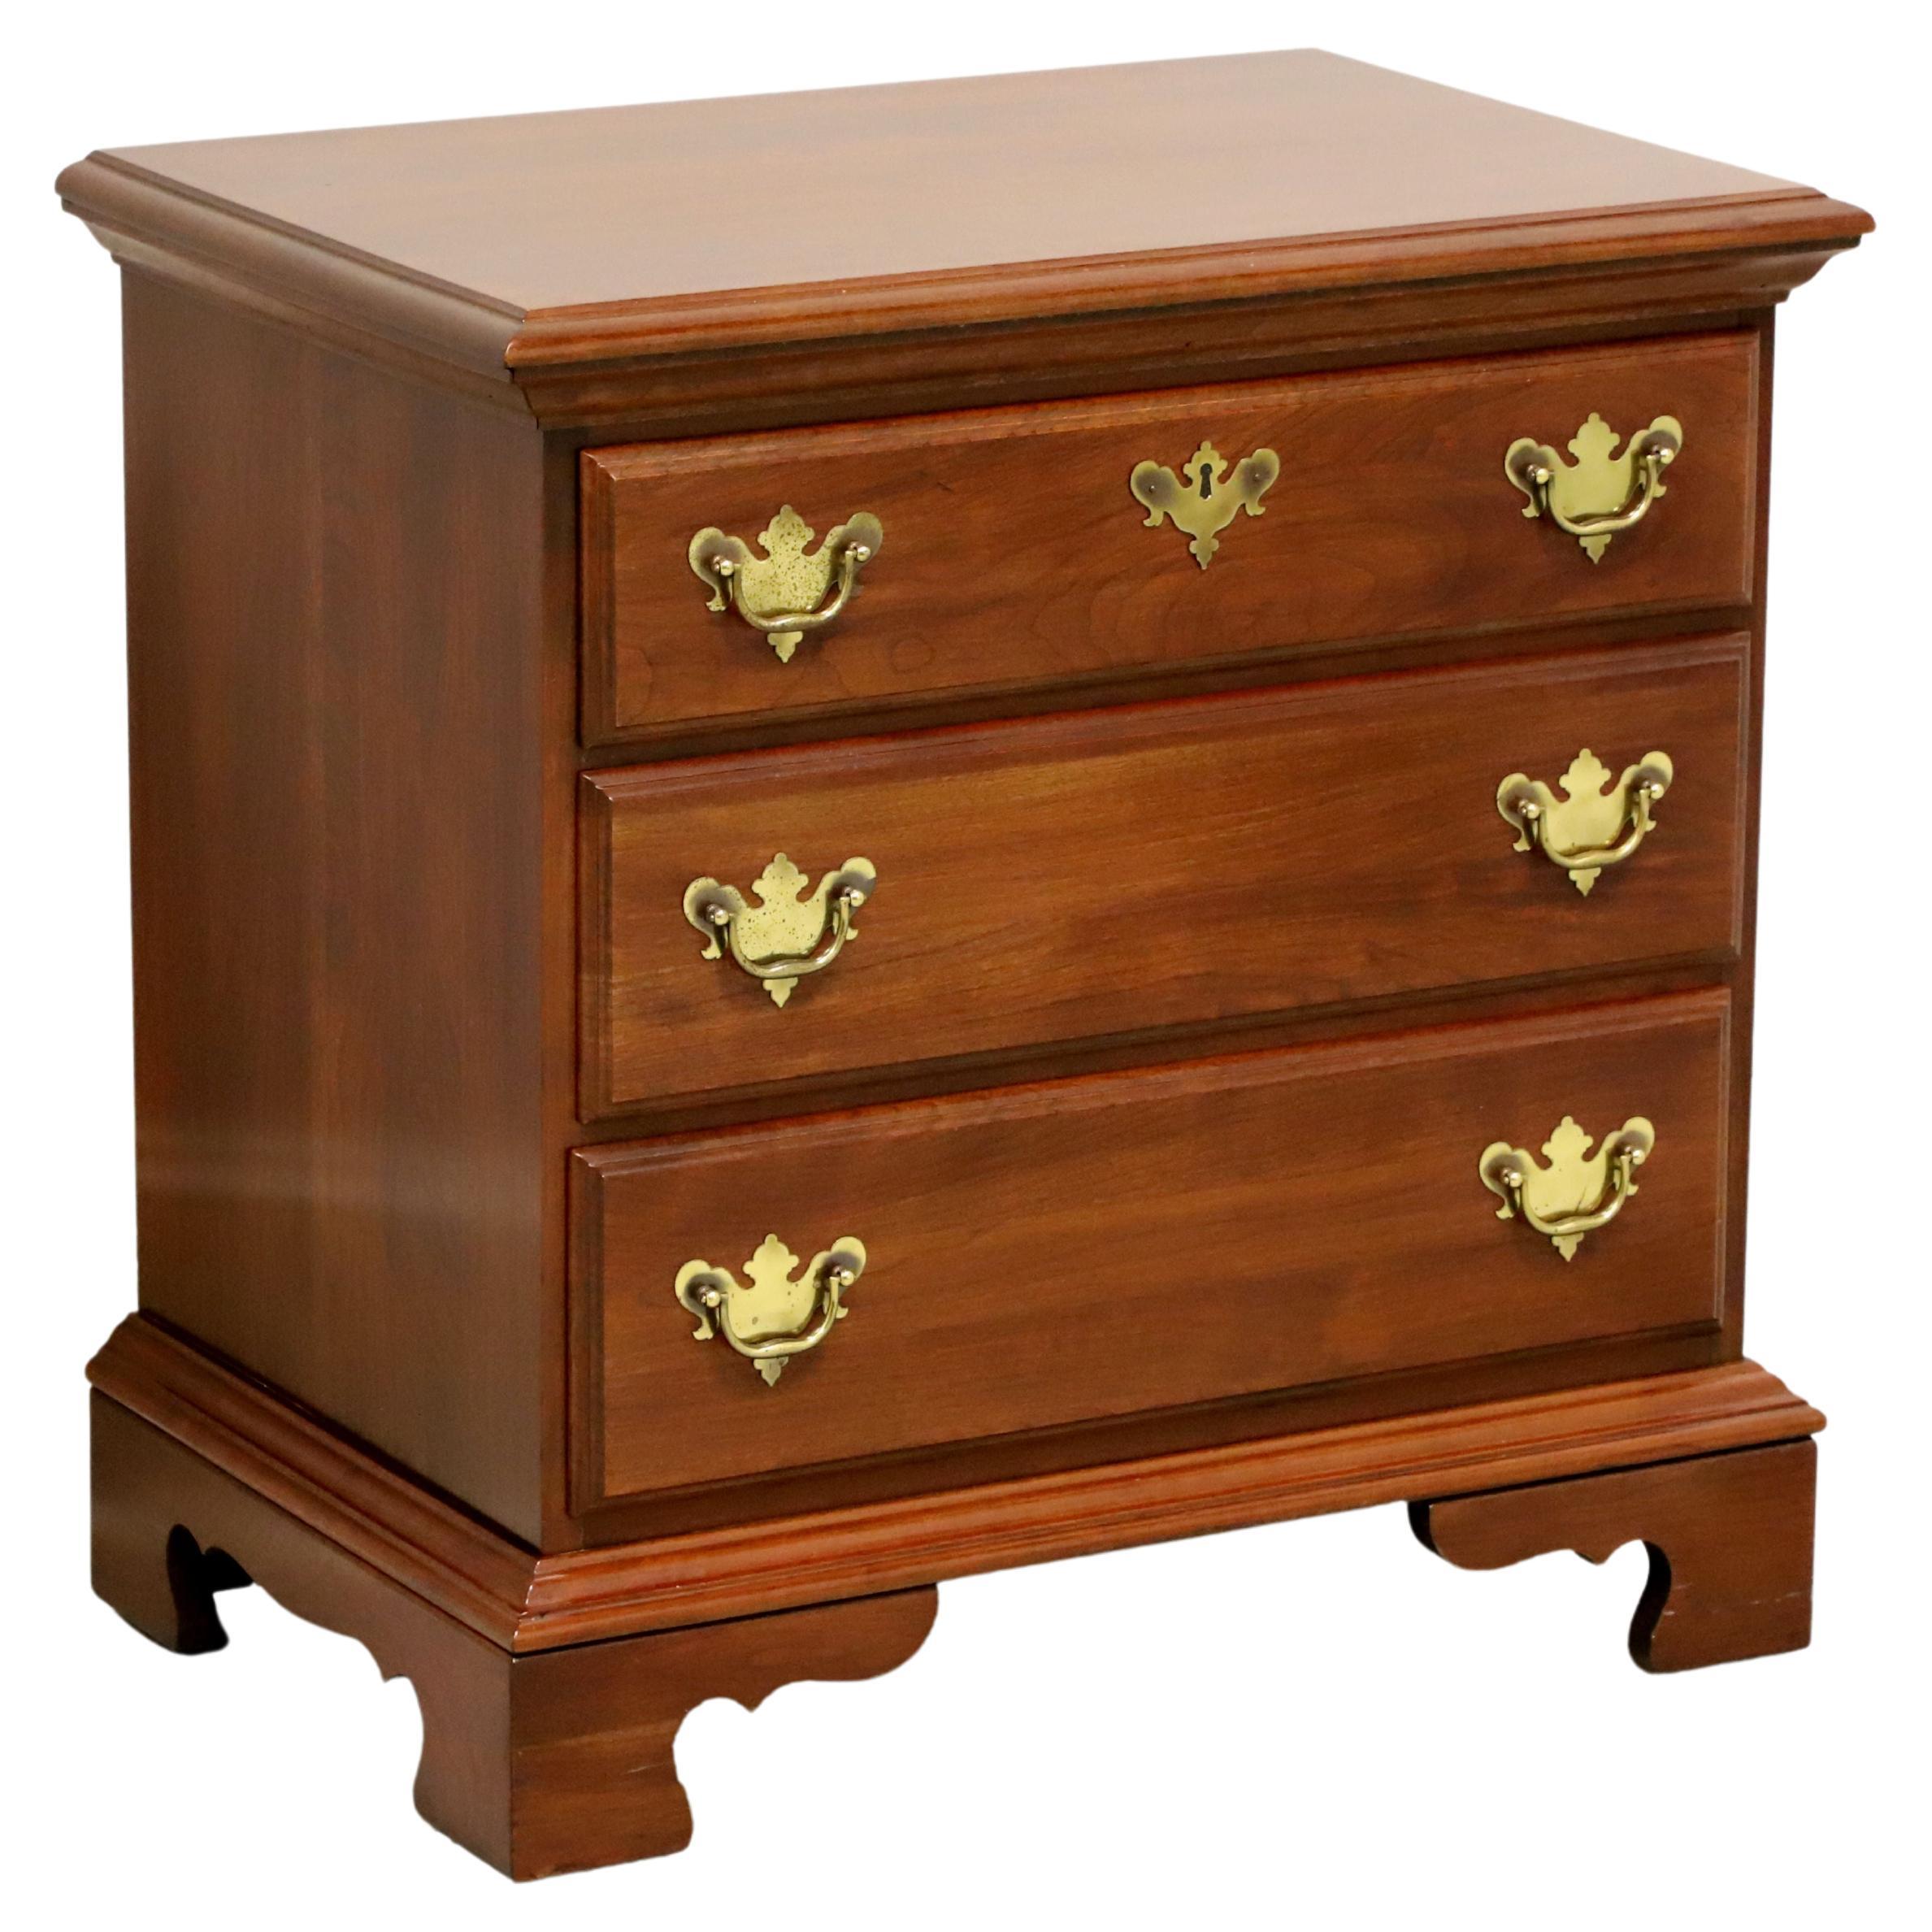 JAMESTOWN STERLING Cherry Chippendale Three-Drawer Nightstand Bedside Chest For Sale